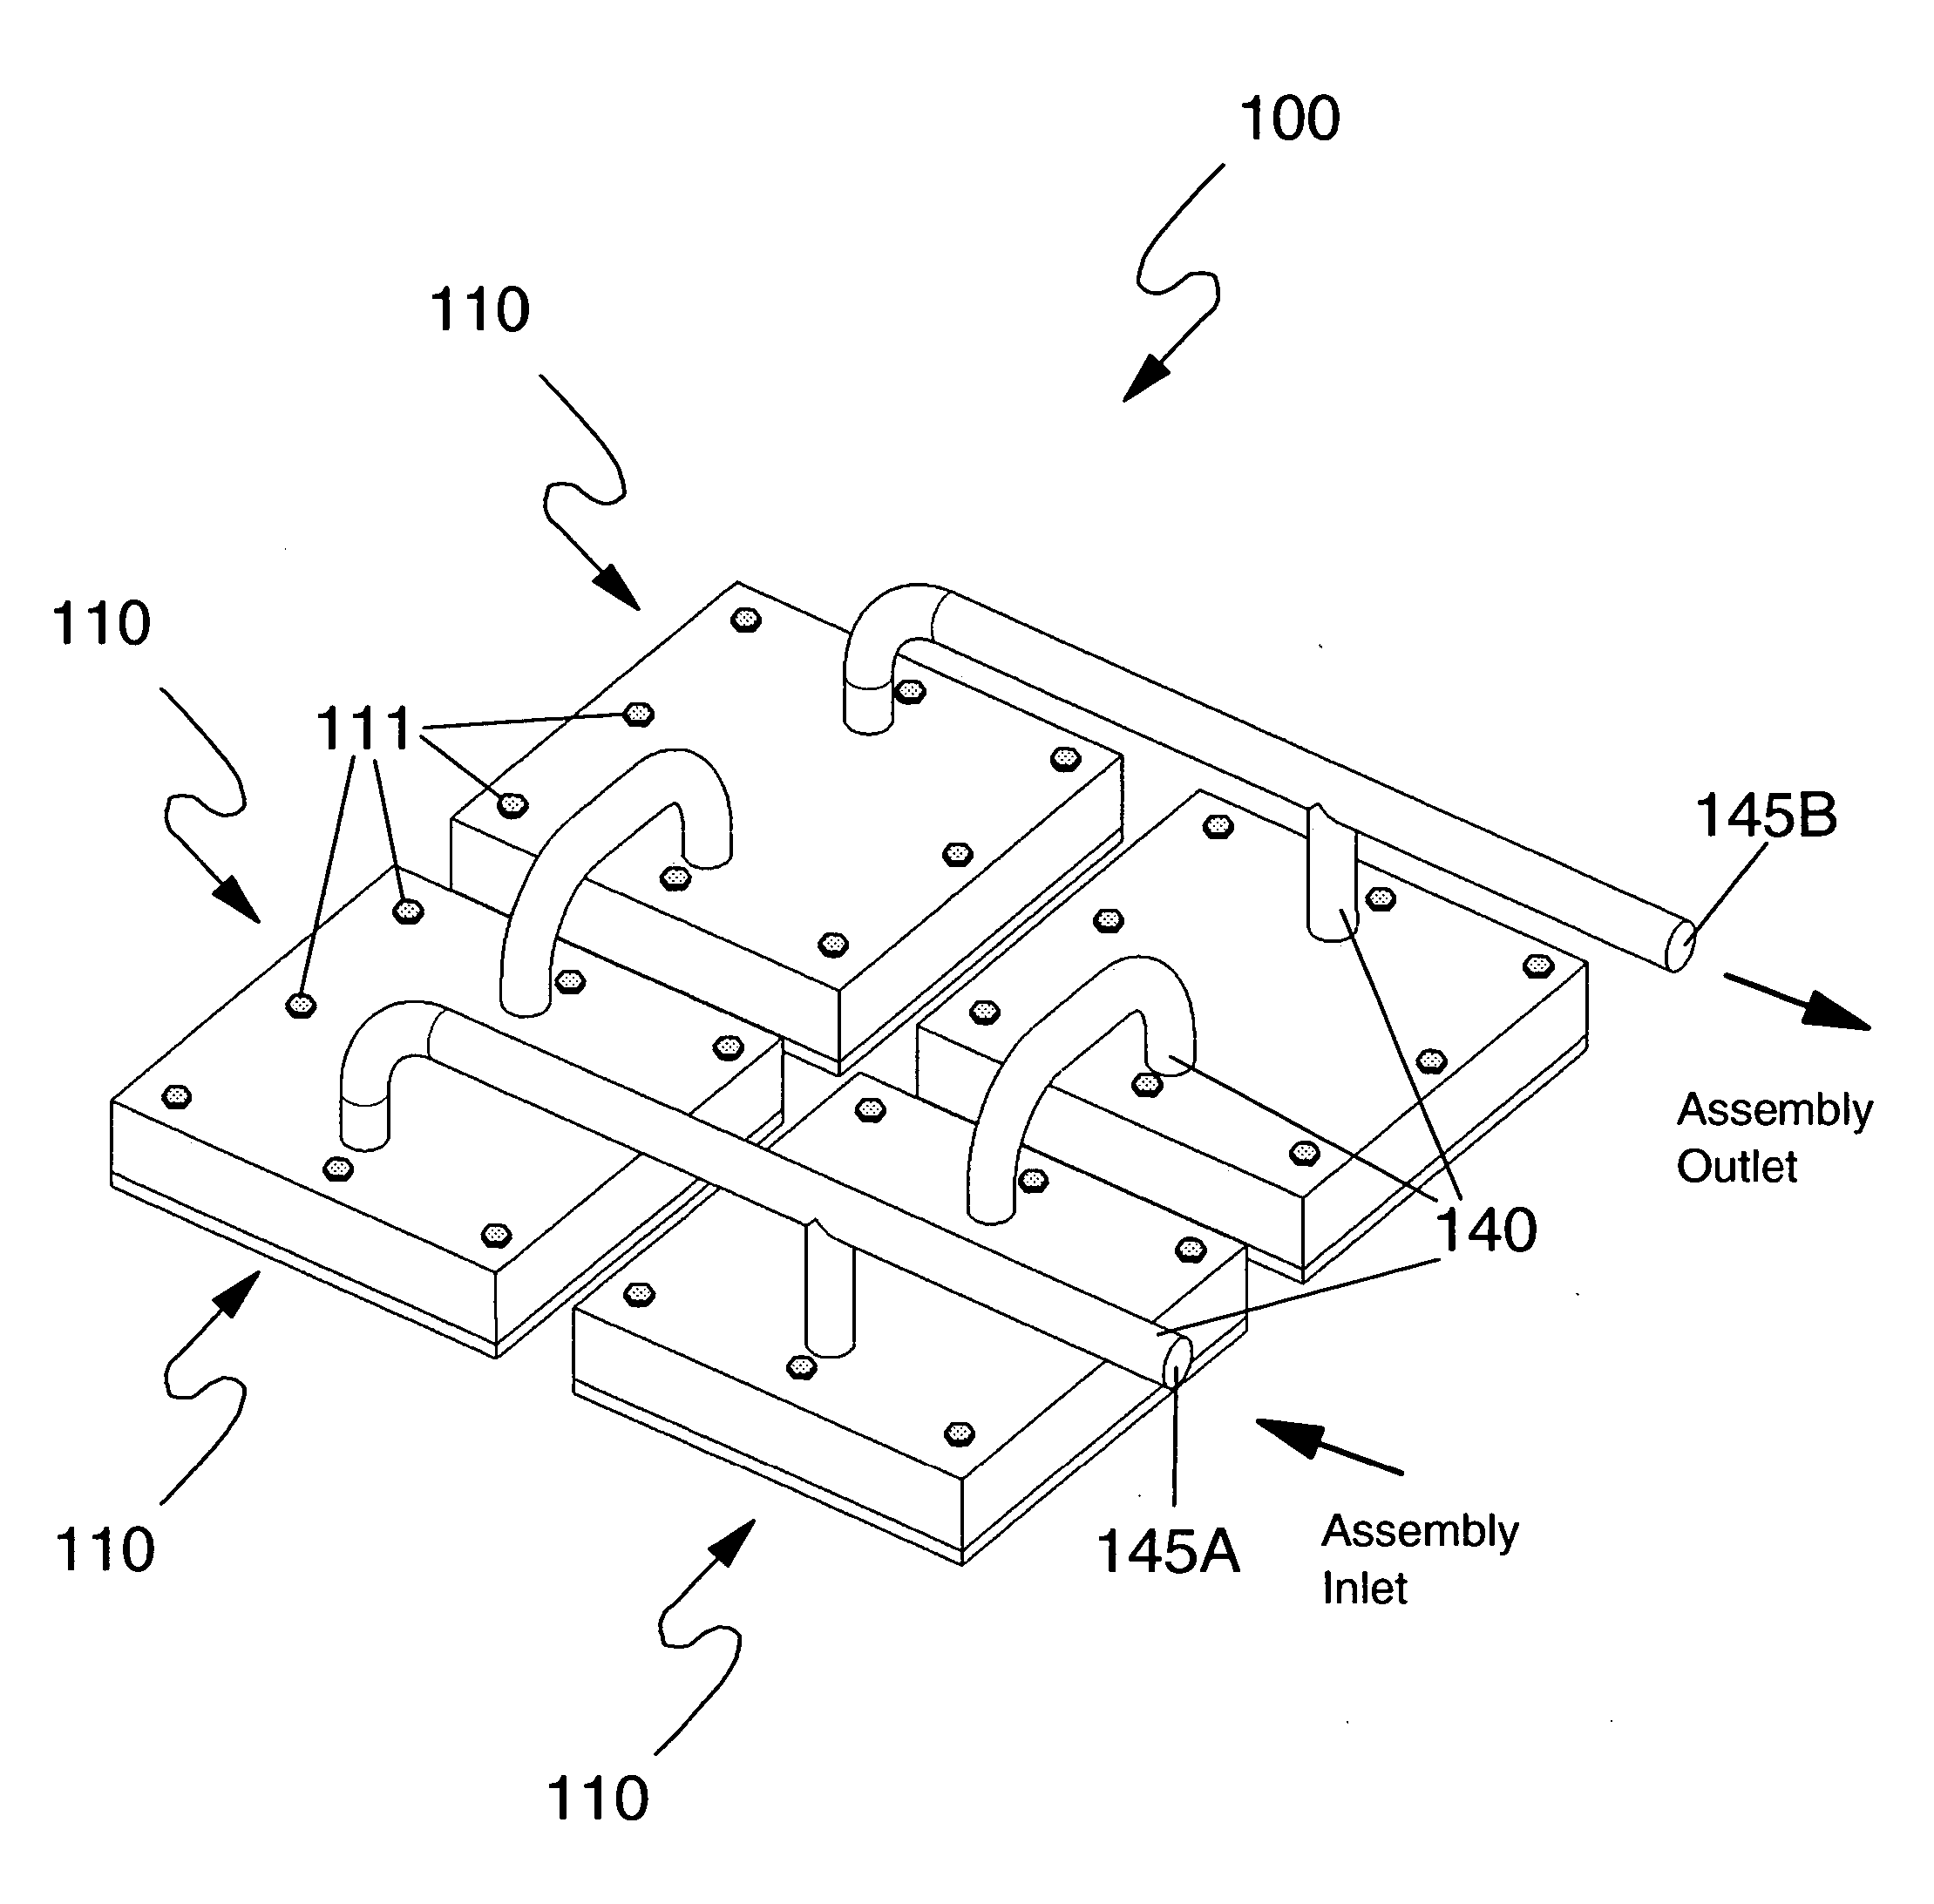 Composite cold plate assembly